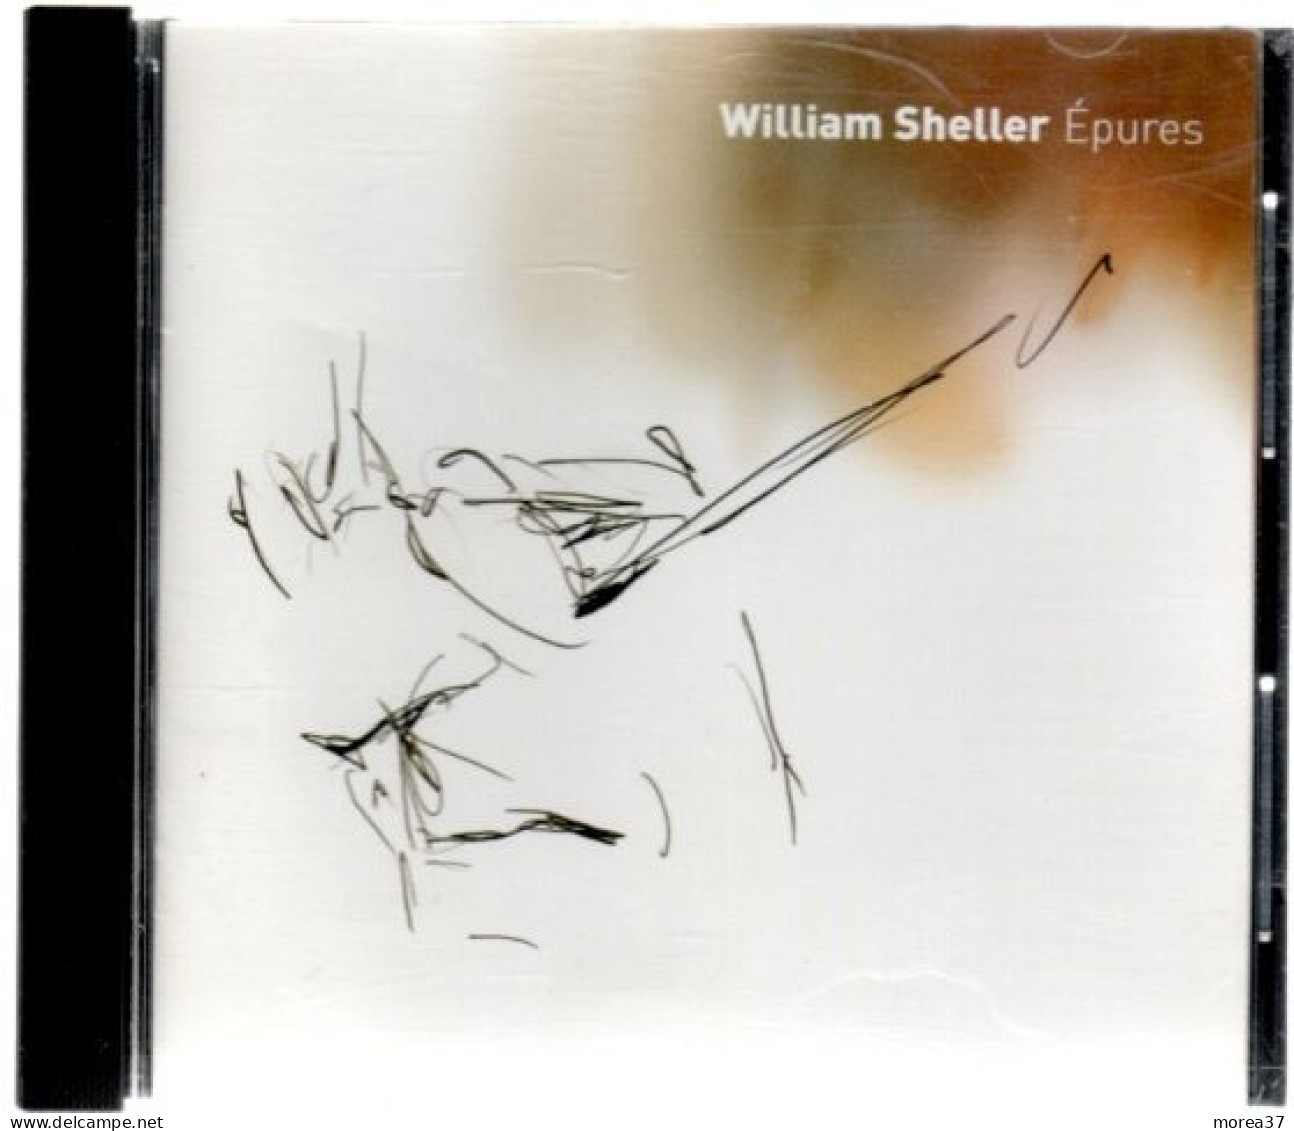 WILLIAM SHELLER  Epures       (REF CD 2) - Other - French Music